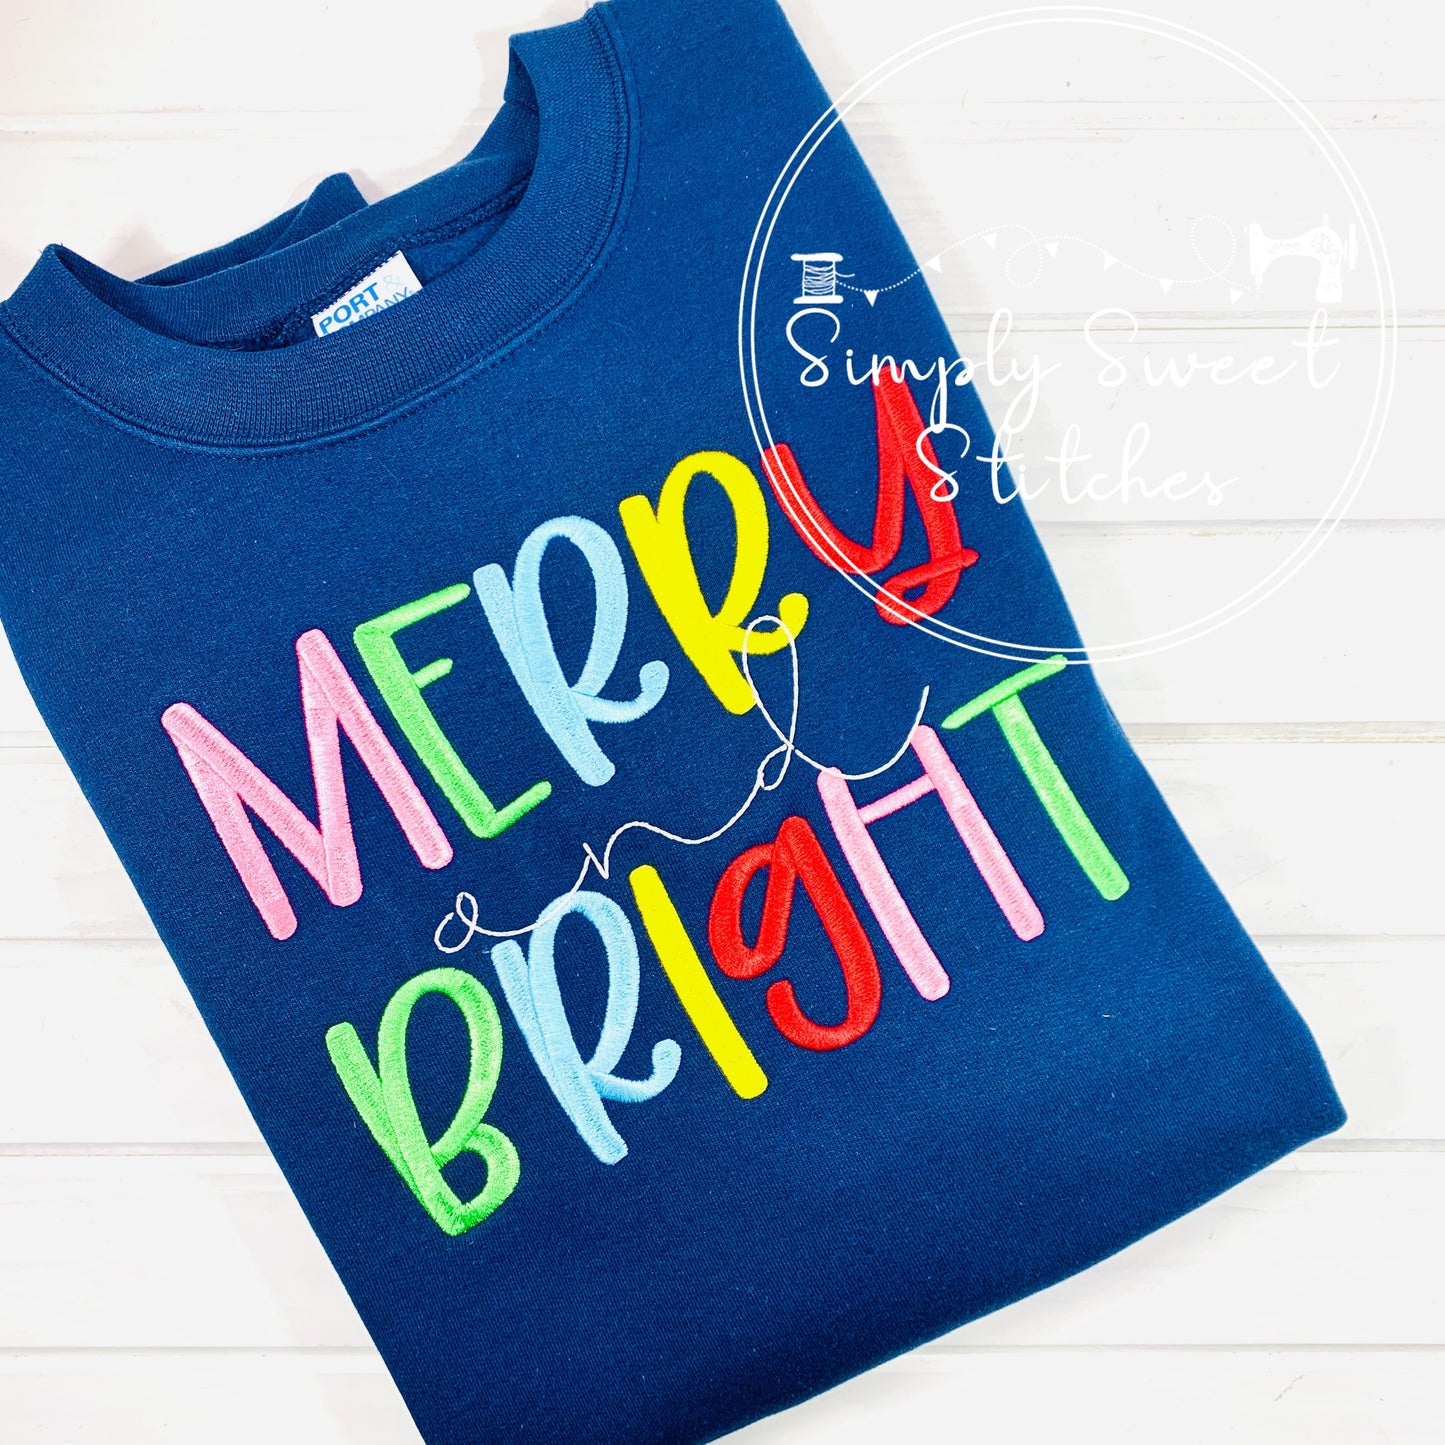 2168 - MERRY AND BRIGHT - EMBROIDERY ADULT SWEATSHIRT